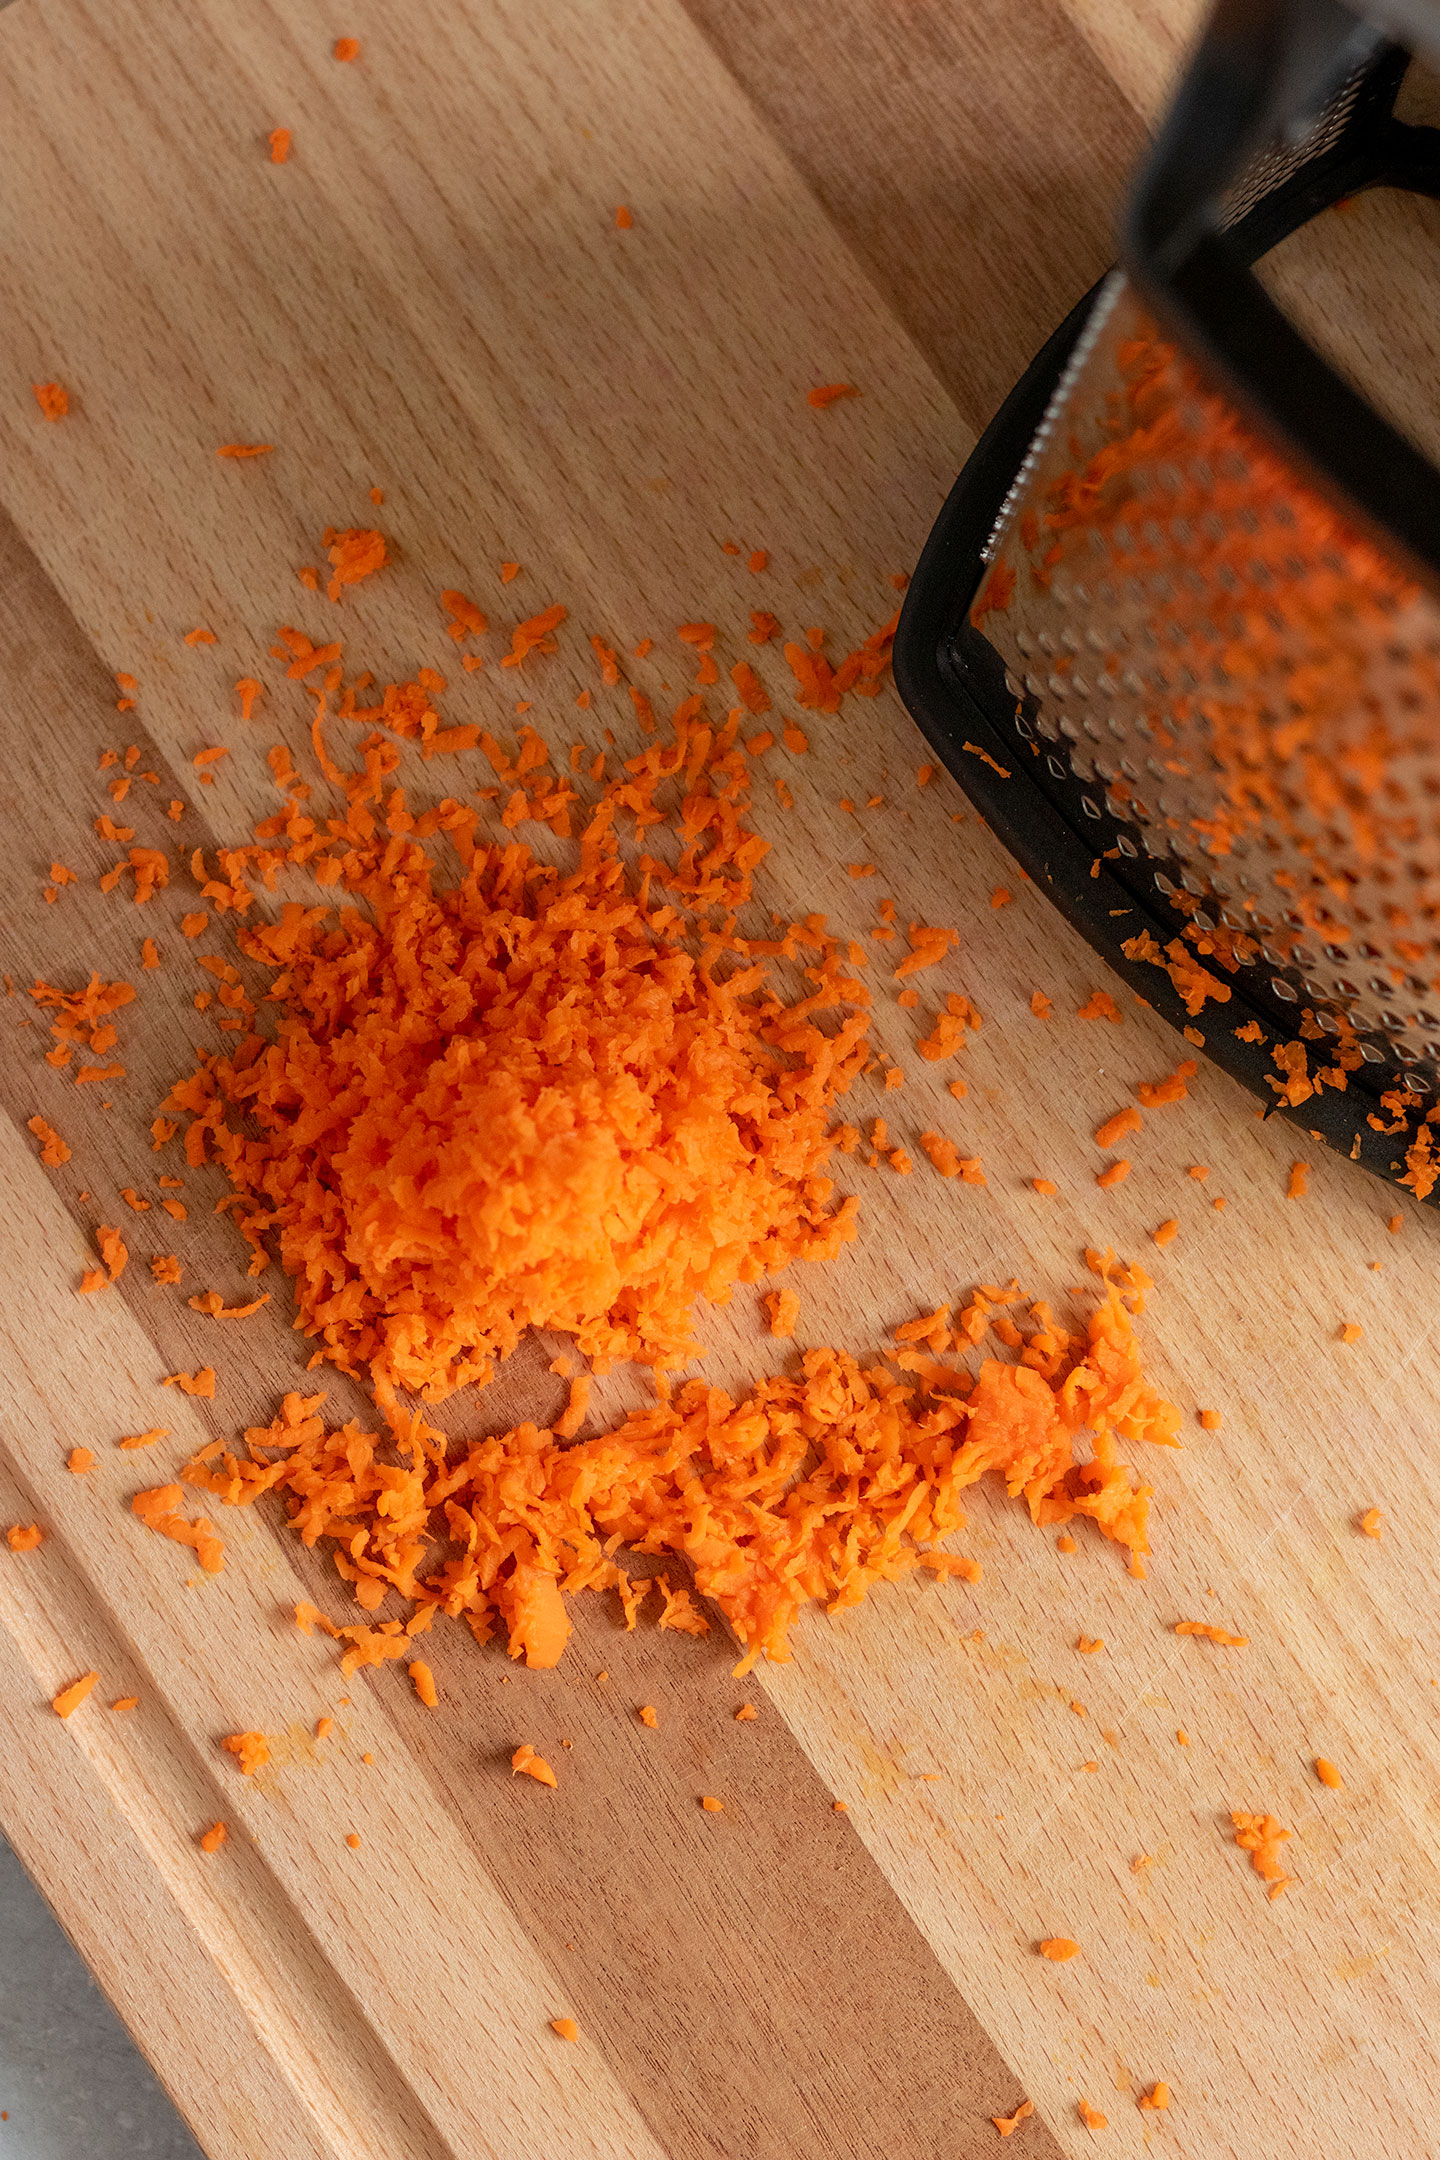 Shredded carrots next to a box grater on a cutting board.